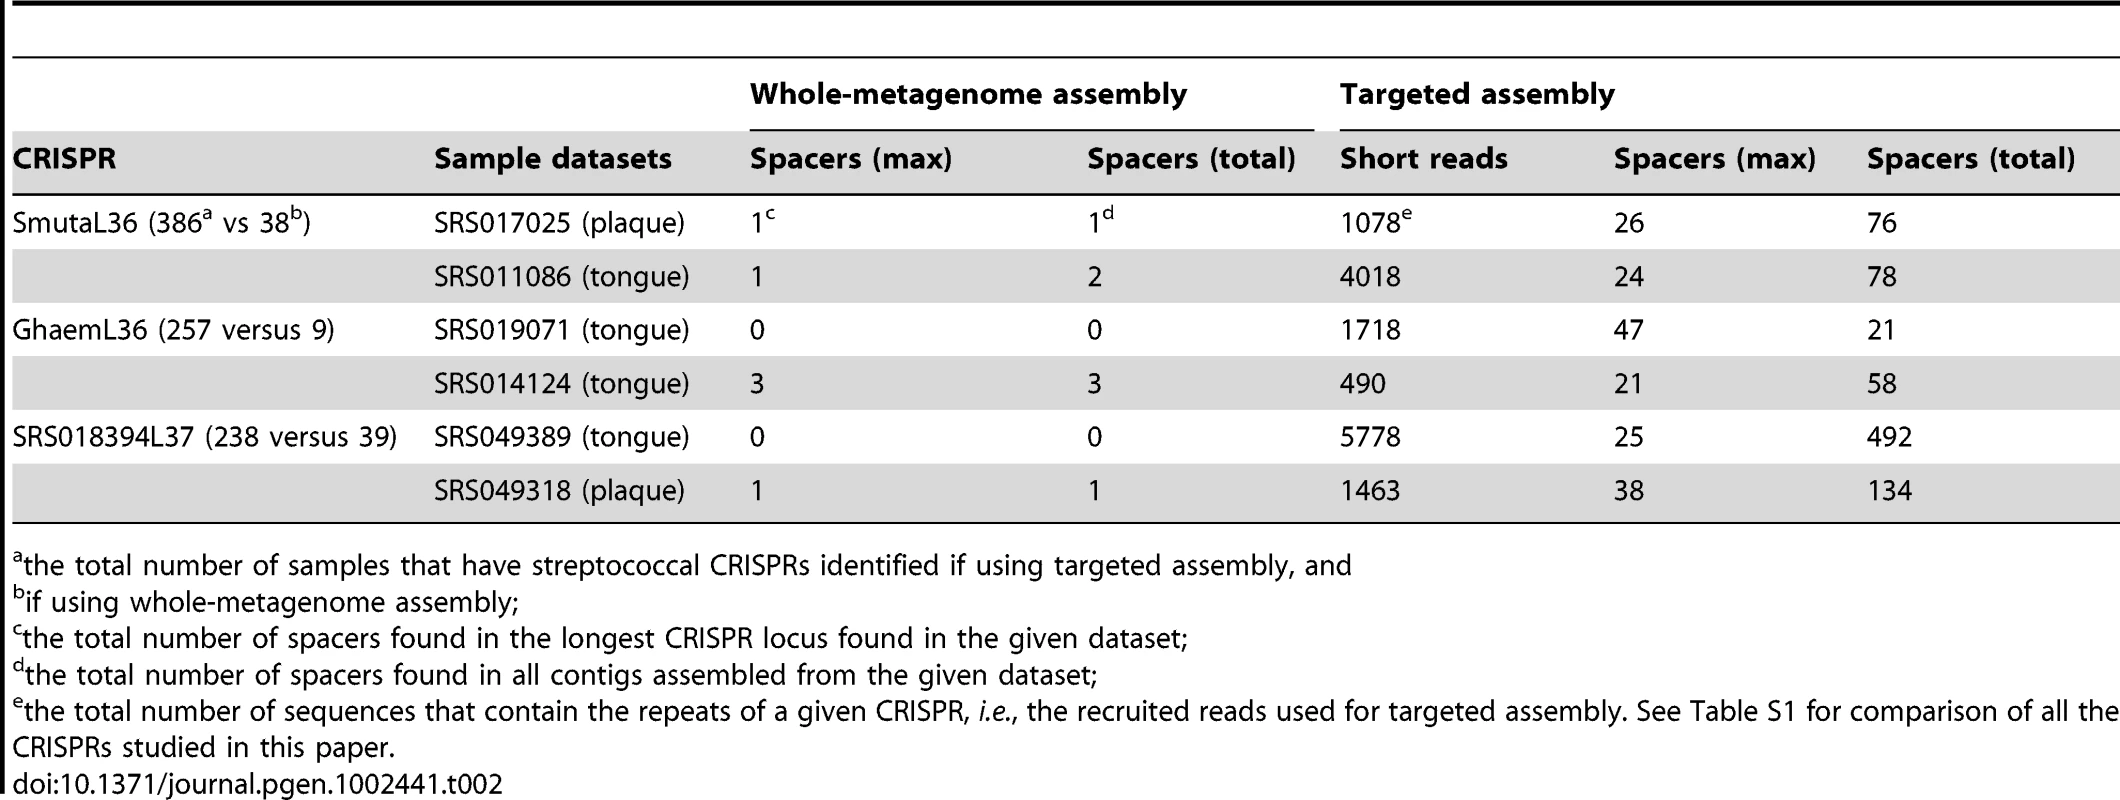 Comparison of CRISPR identification using whole-metagenome assembly and targeted assembly.